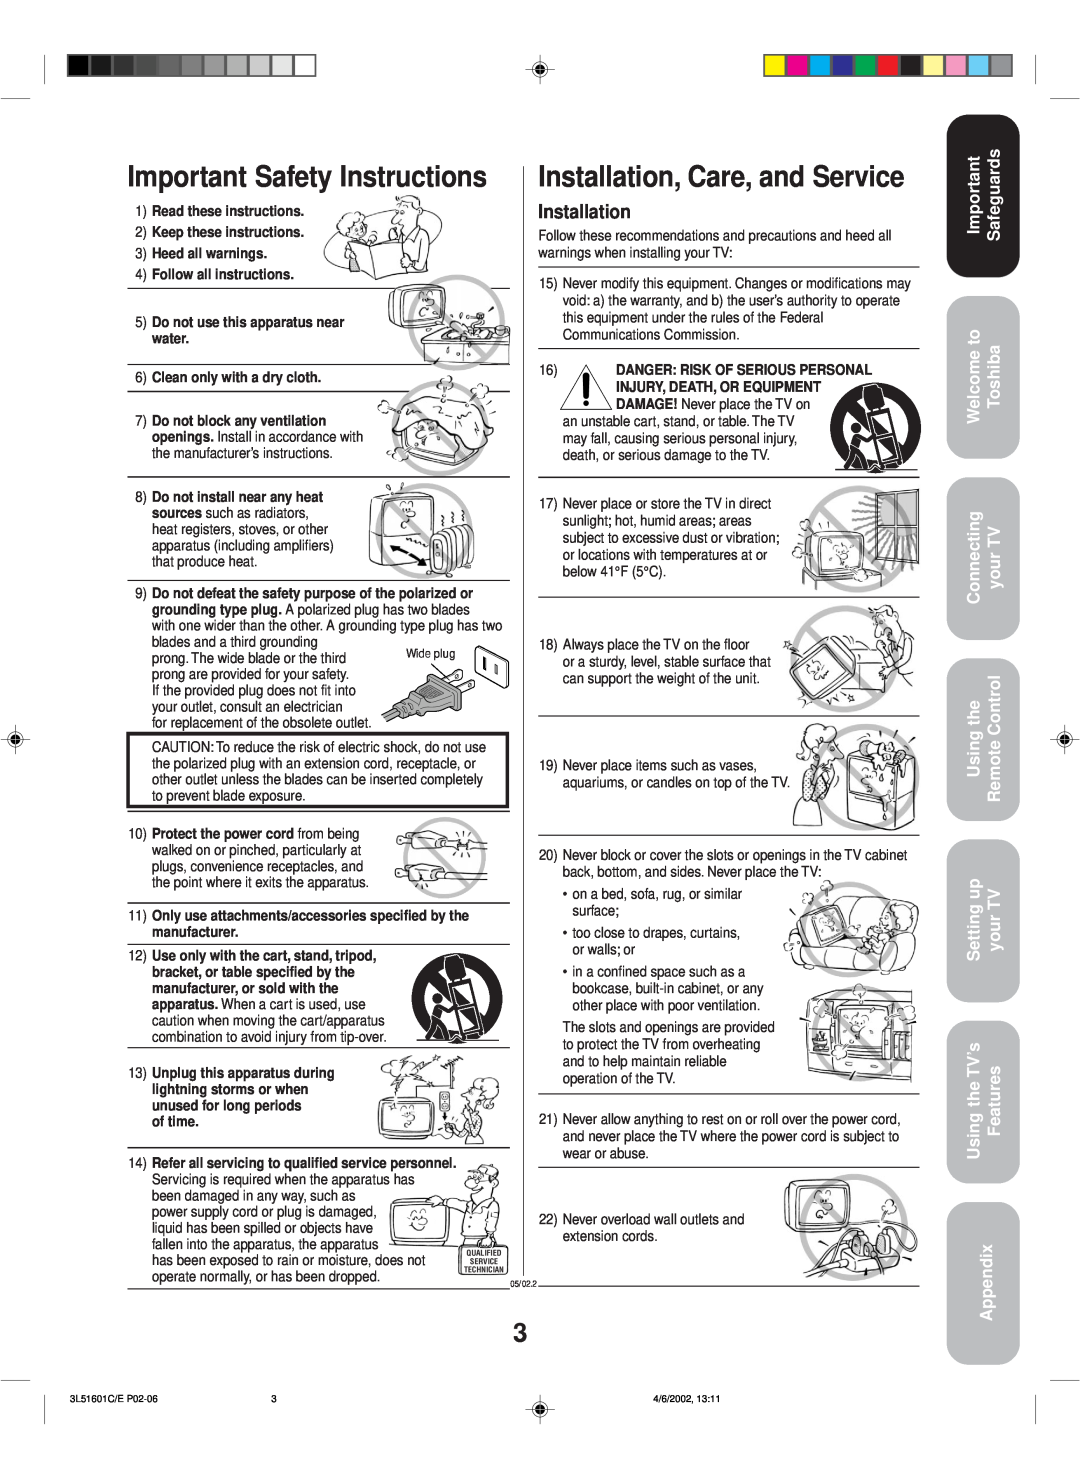 Toshiba TV 27A42 appendix Important Safety Instructions, Installation, Care, and Service, Safeguards, of time 